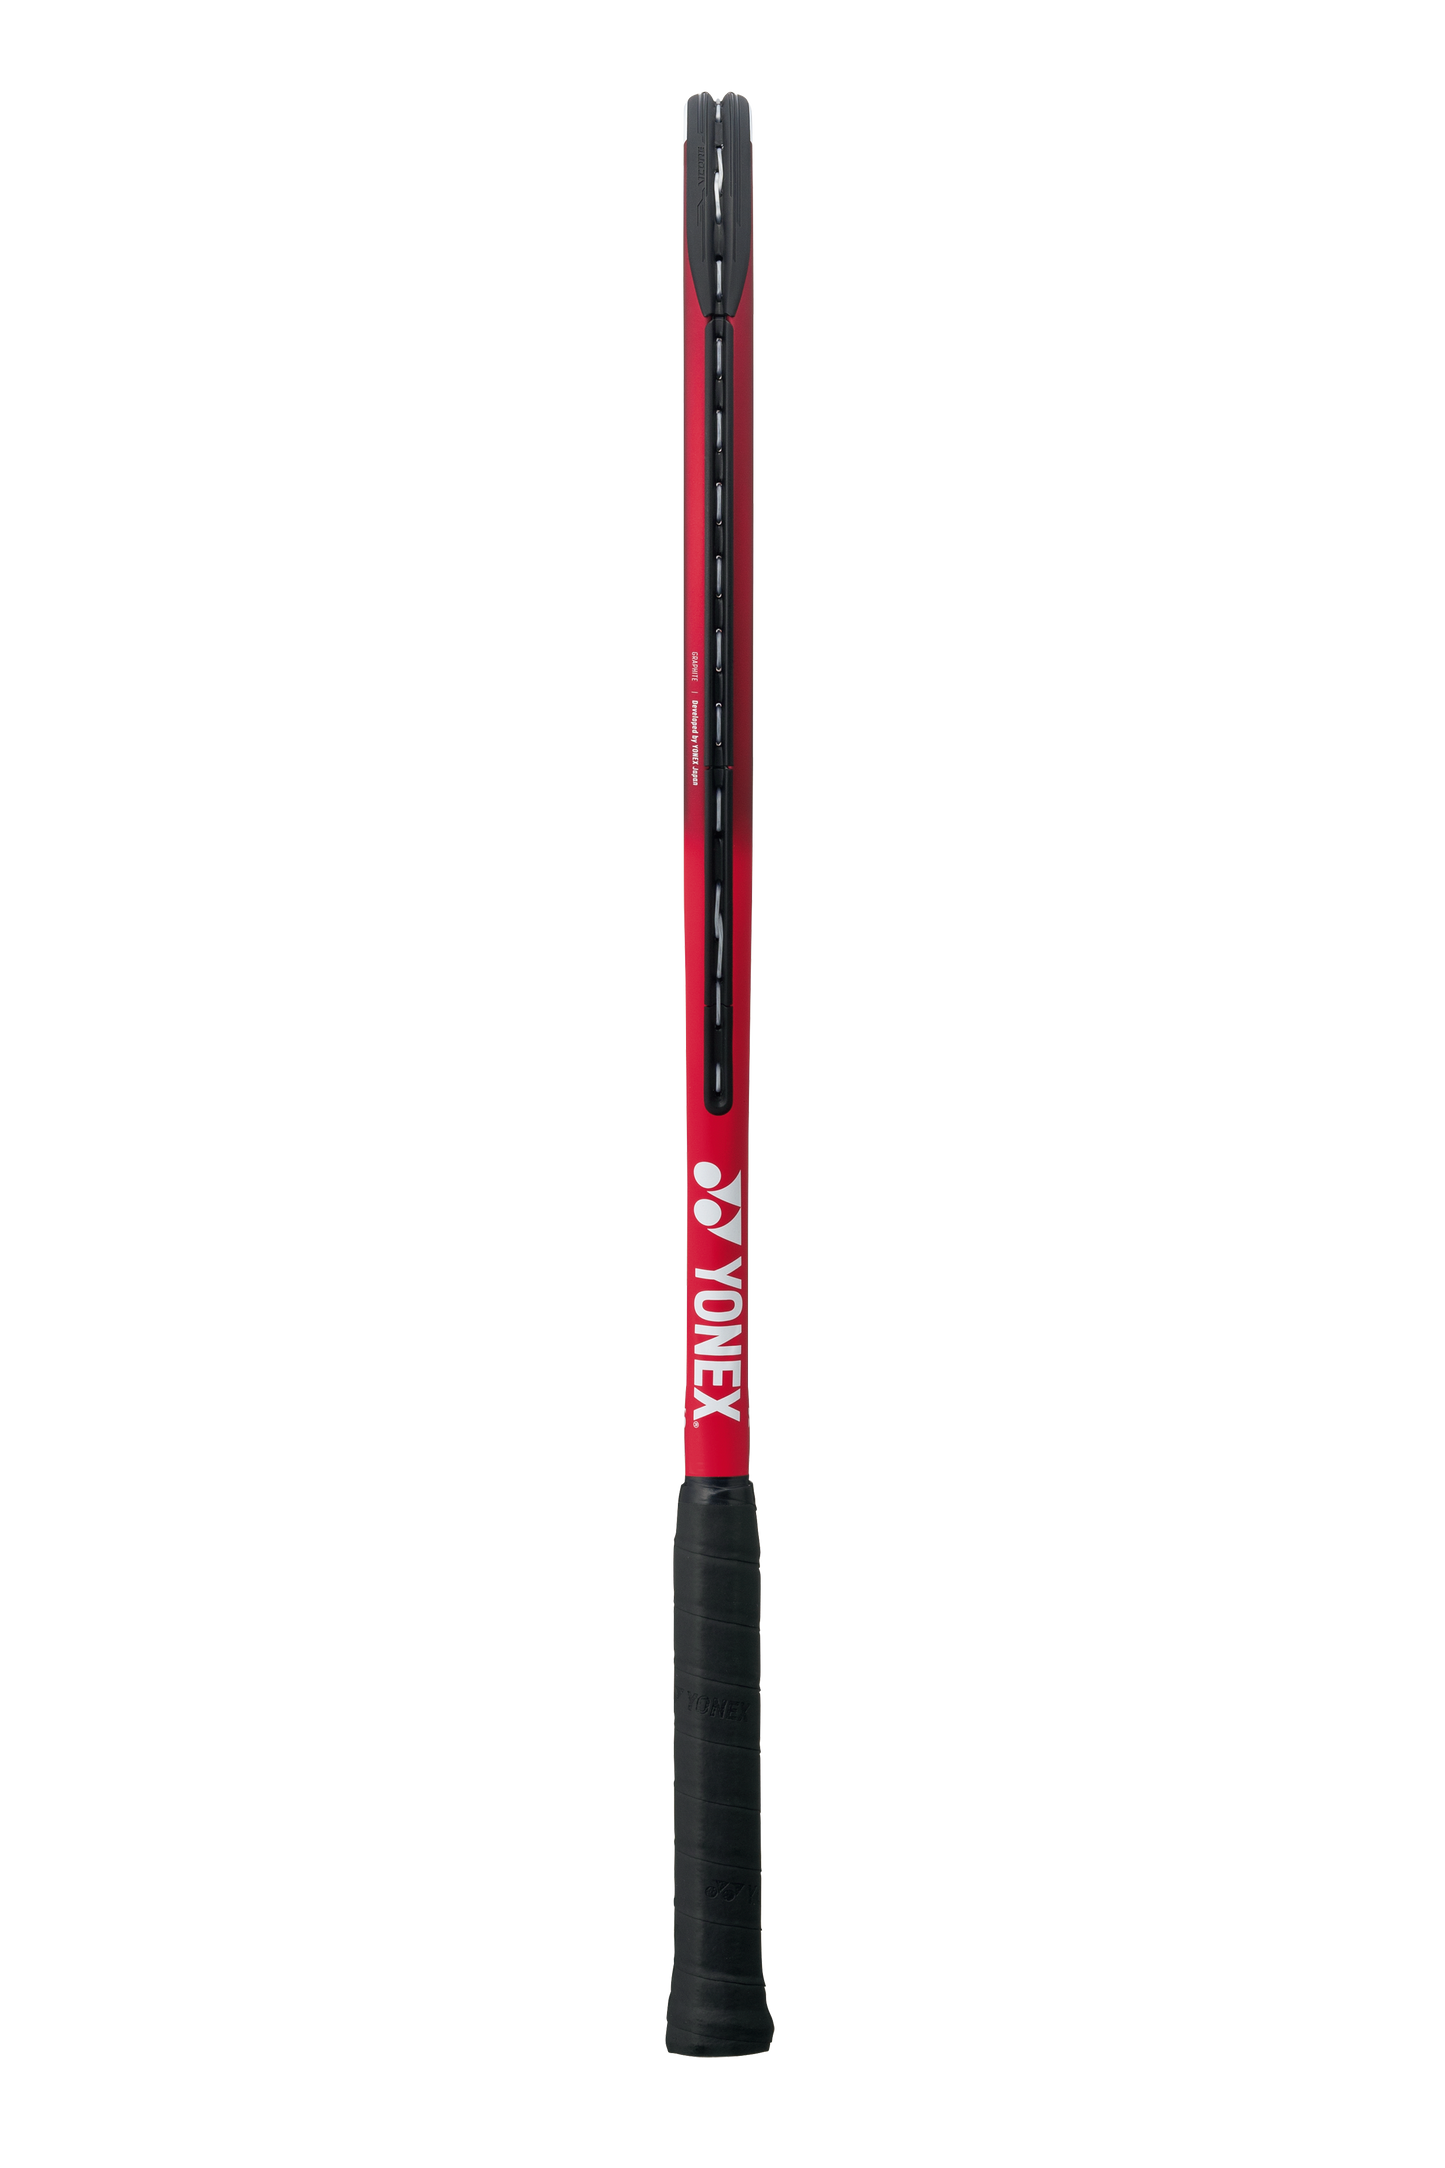 Yonex VCORE ACE in Tango Red for sale at GSM Sports